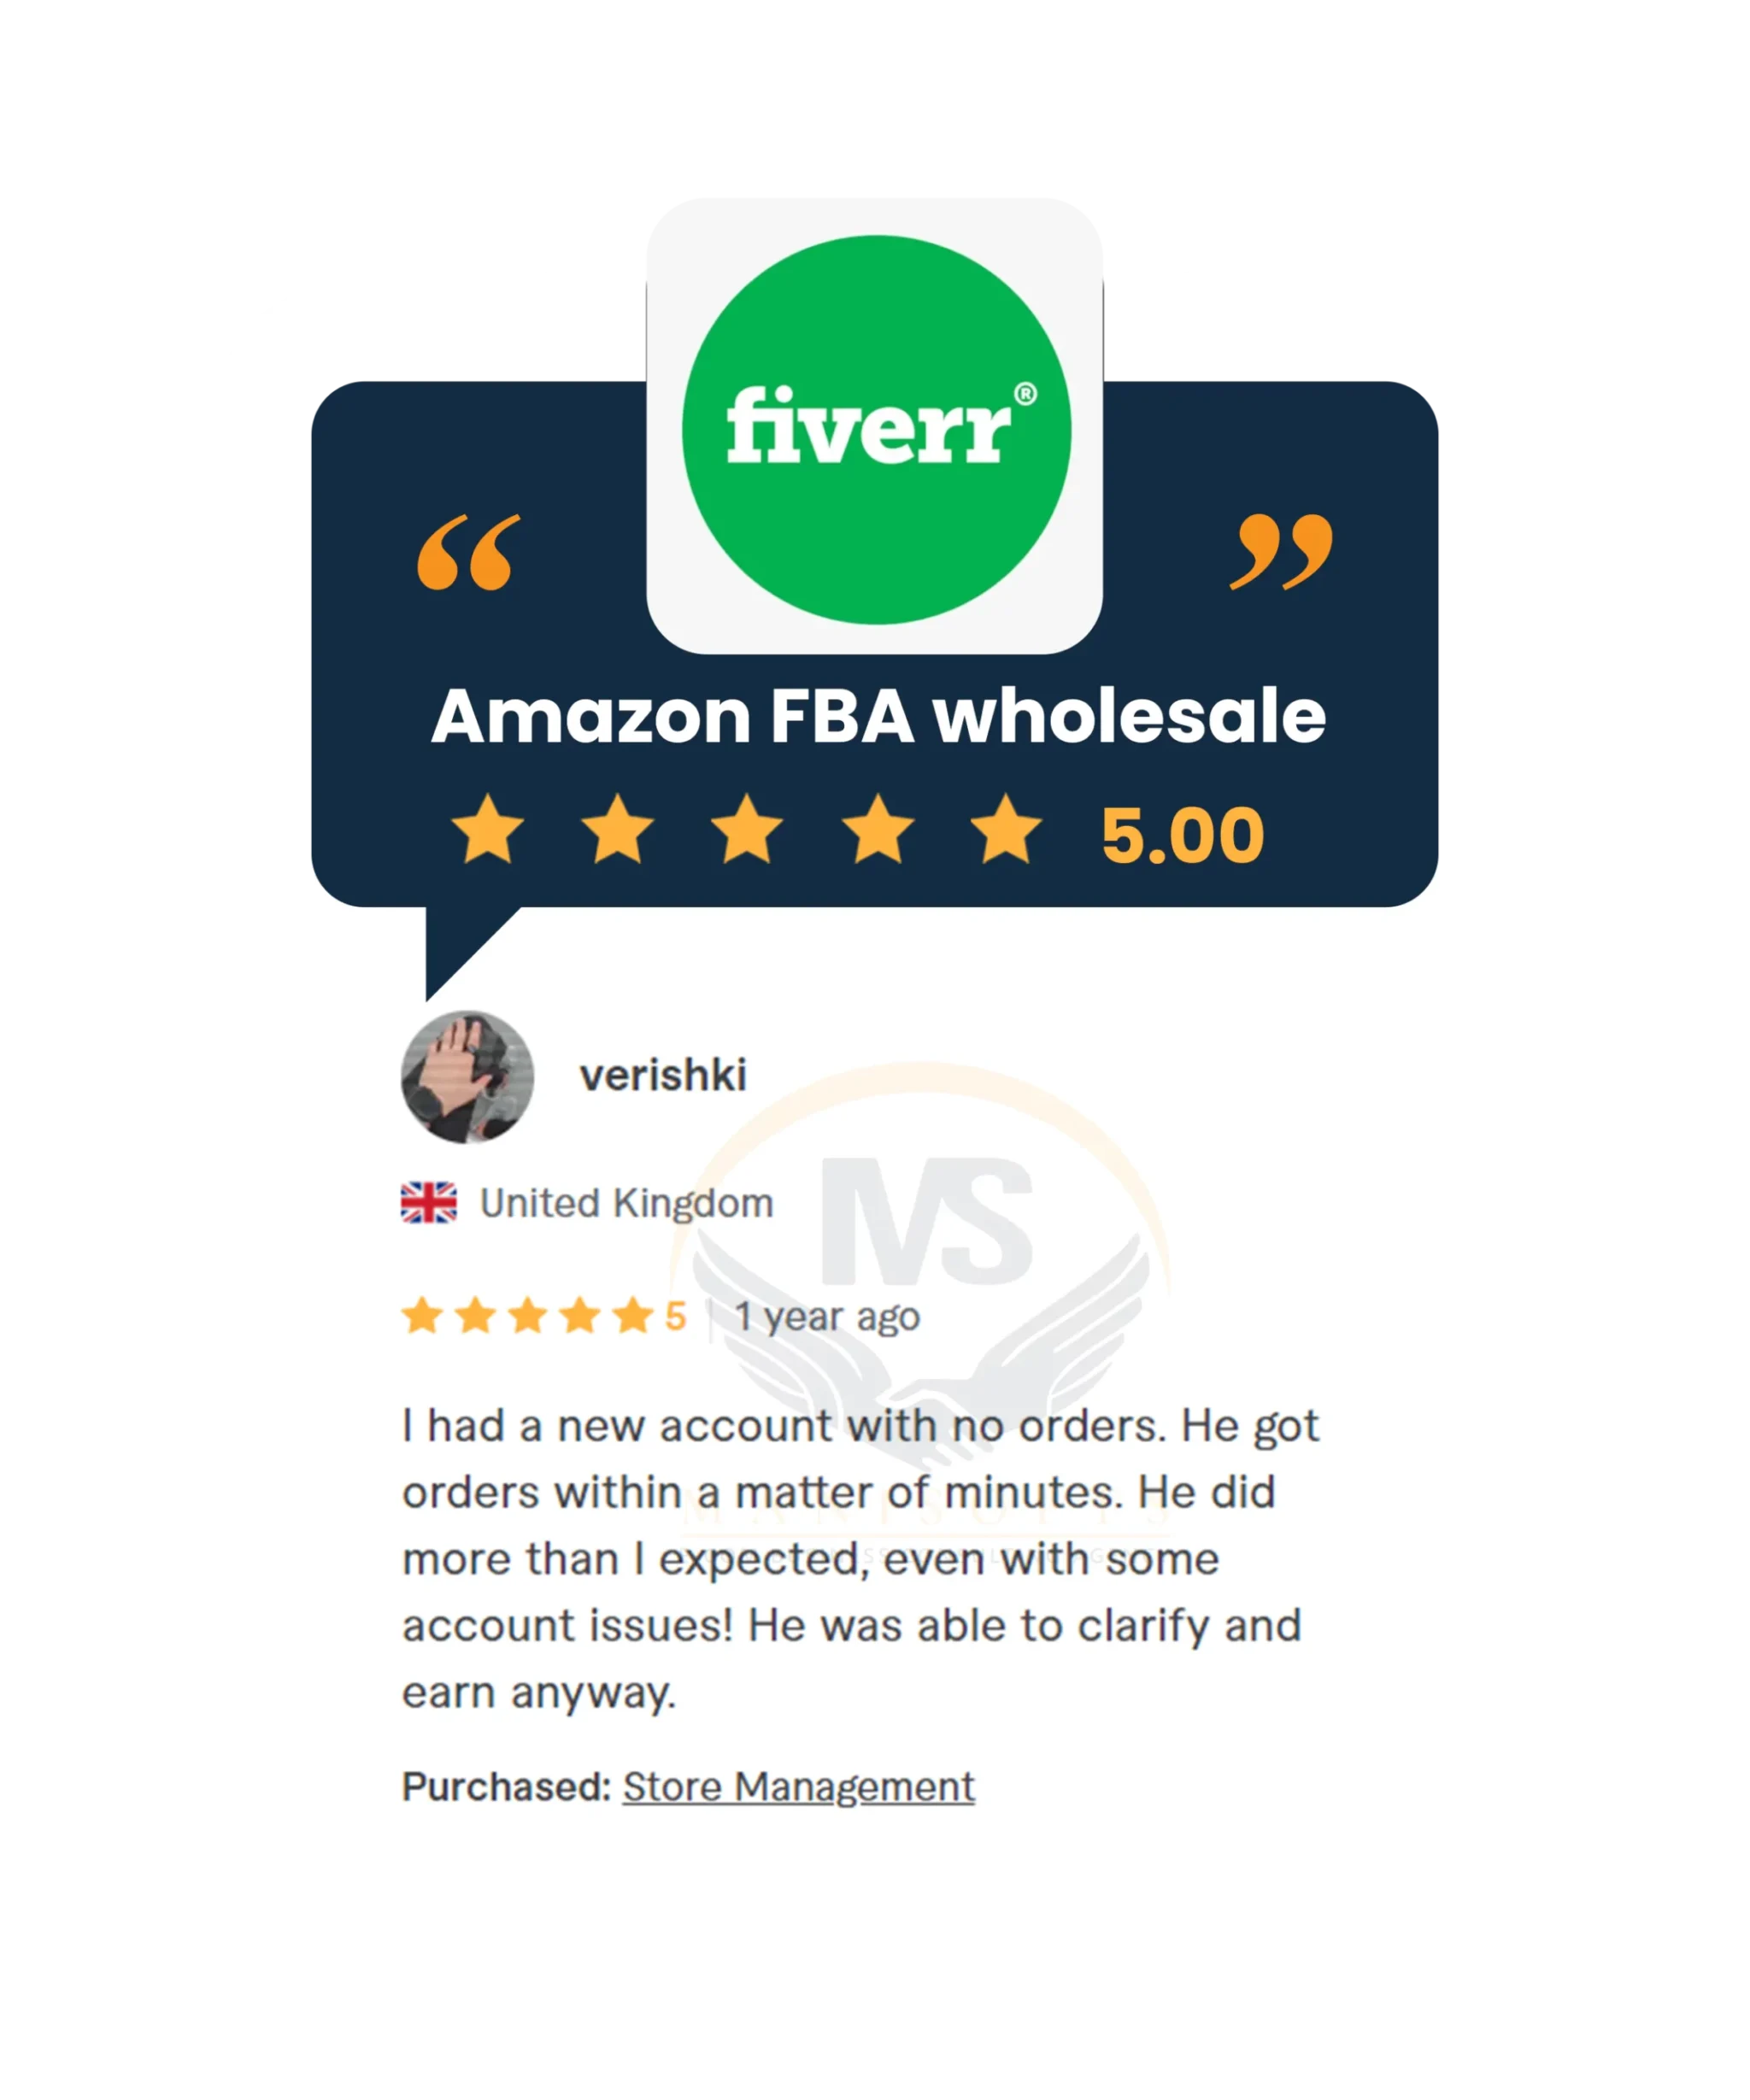 Fiverr review for manisofts